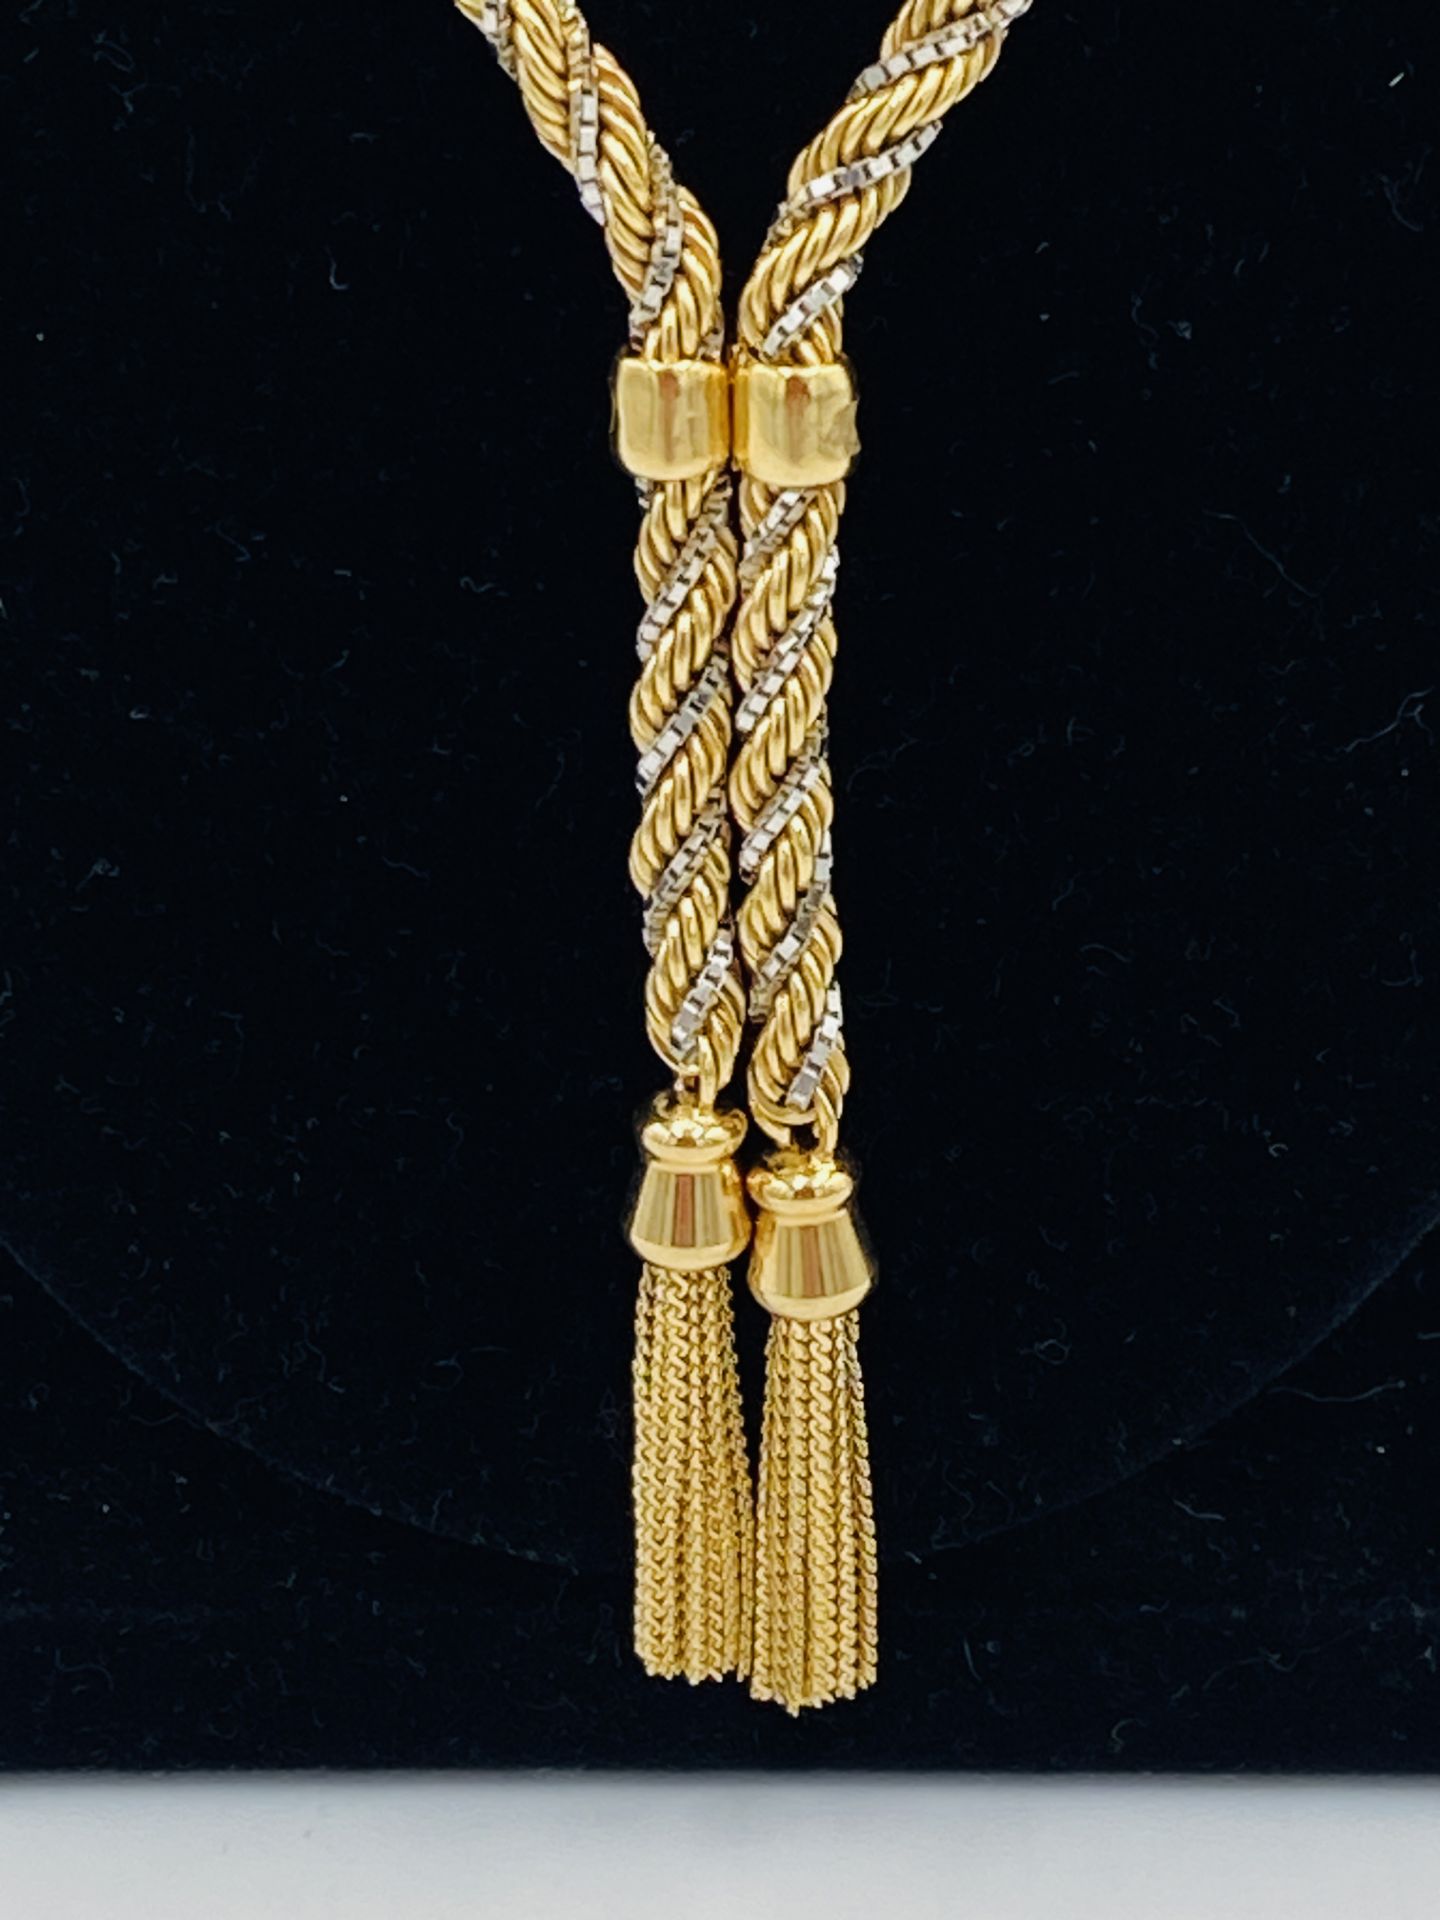 9ct gold and white metal rope twist necklace - Image 2 of 4